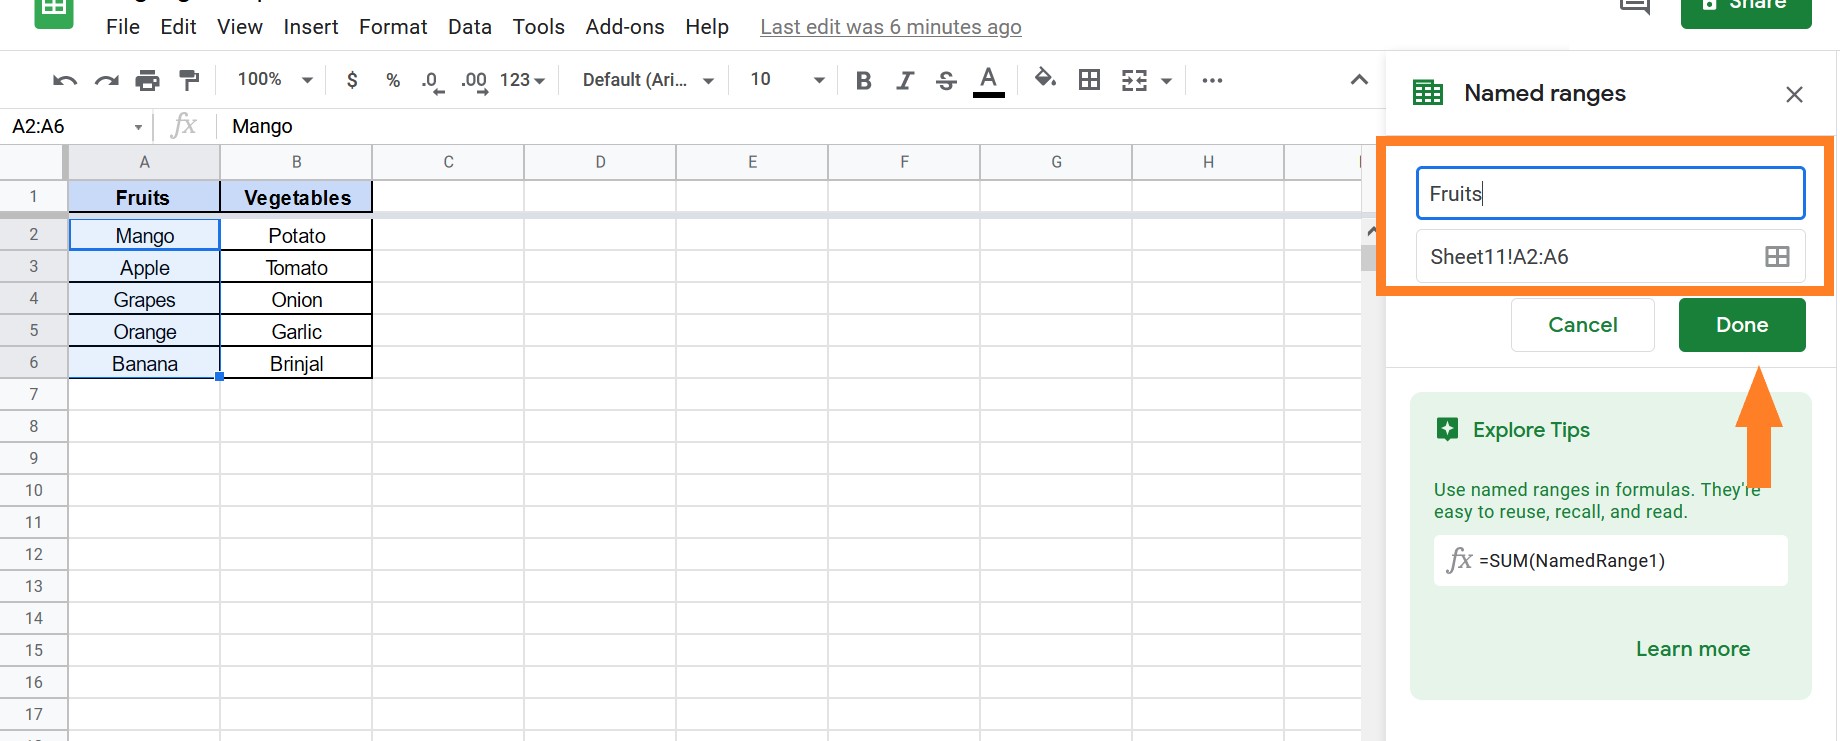 How to Create a Dependent Drop Down List in Google Sheets